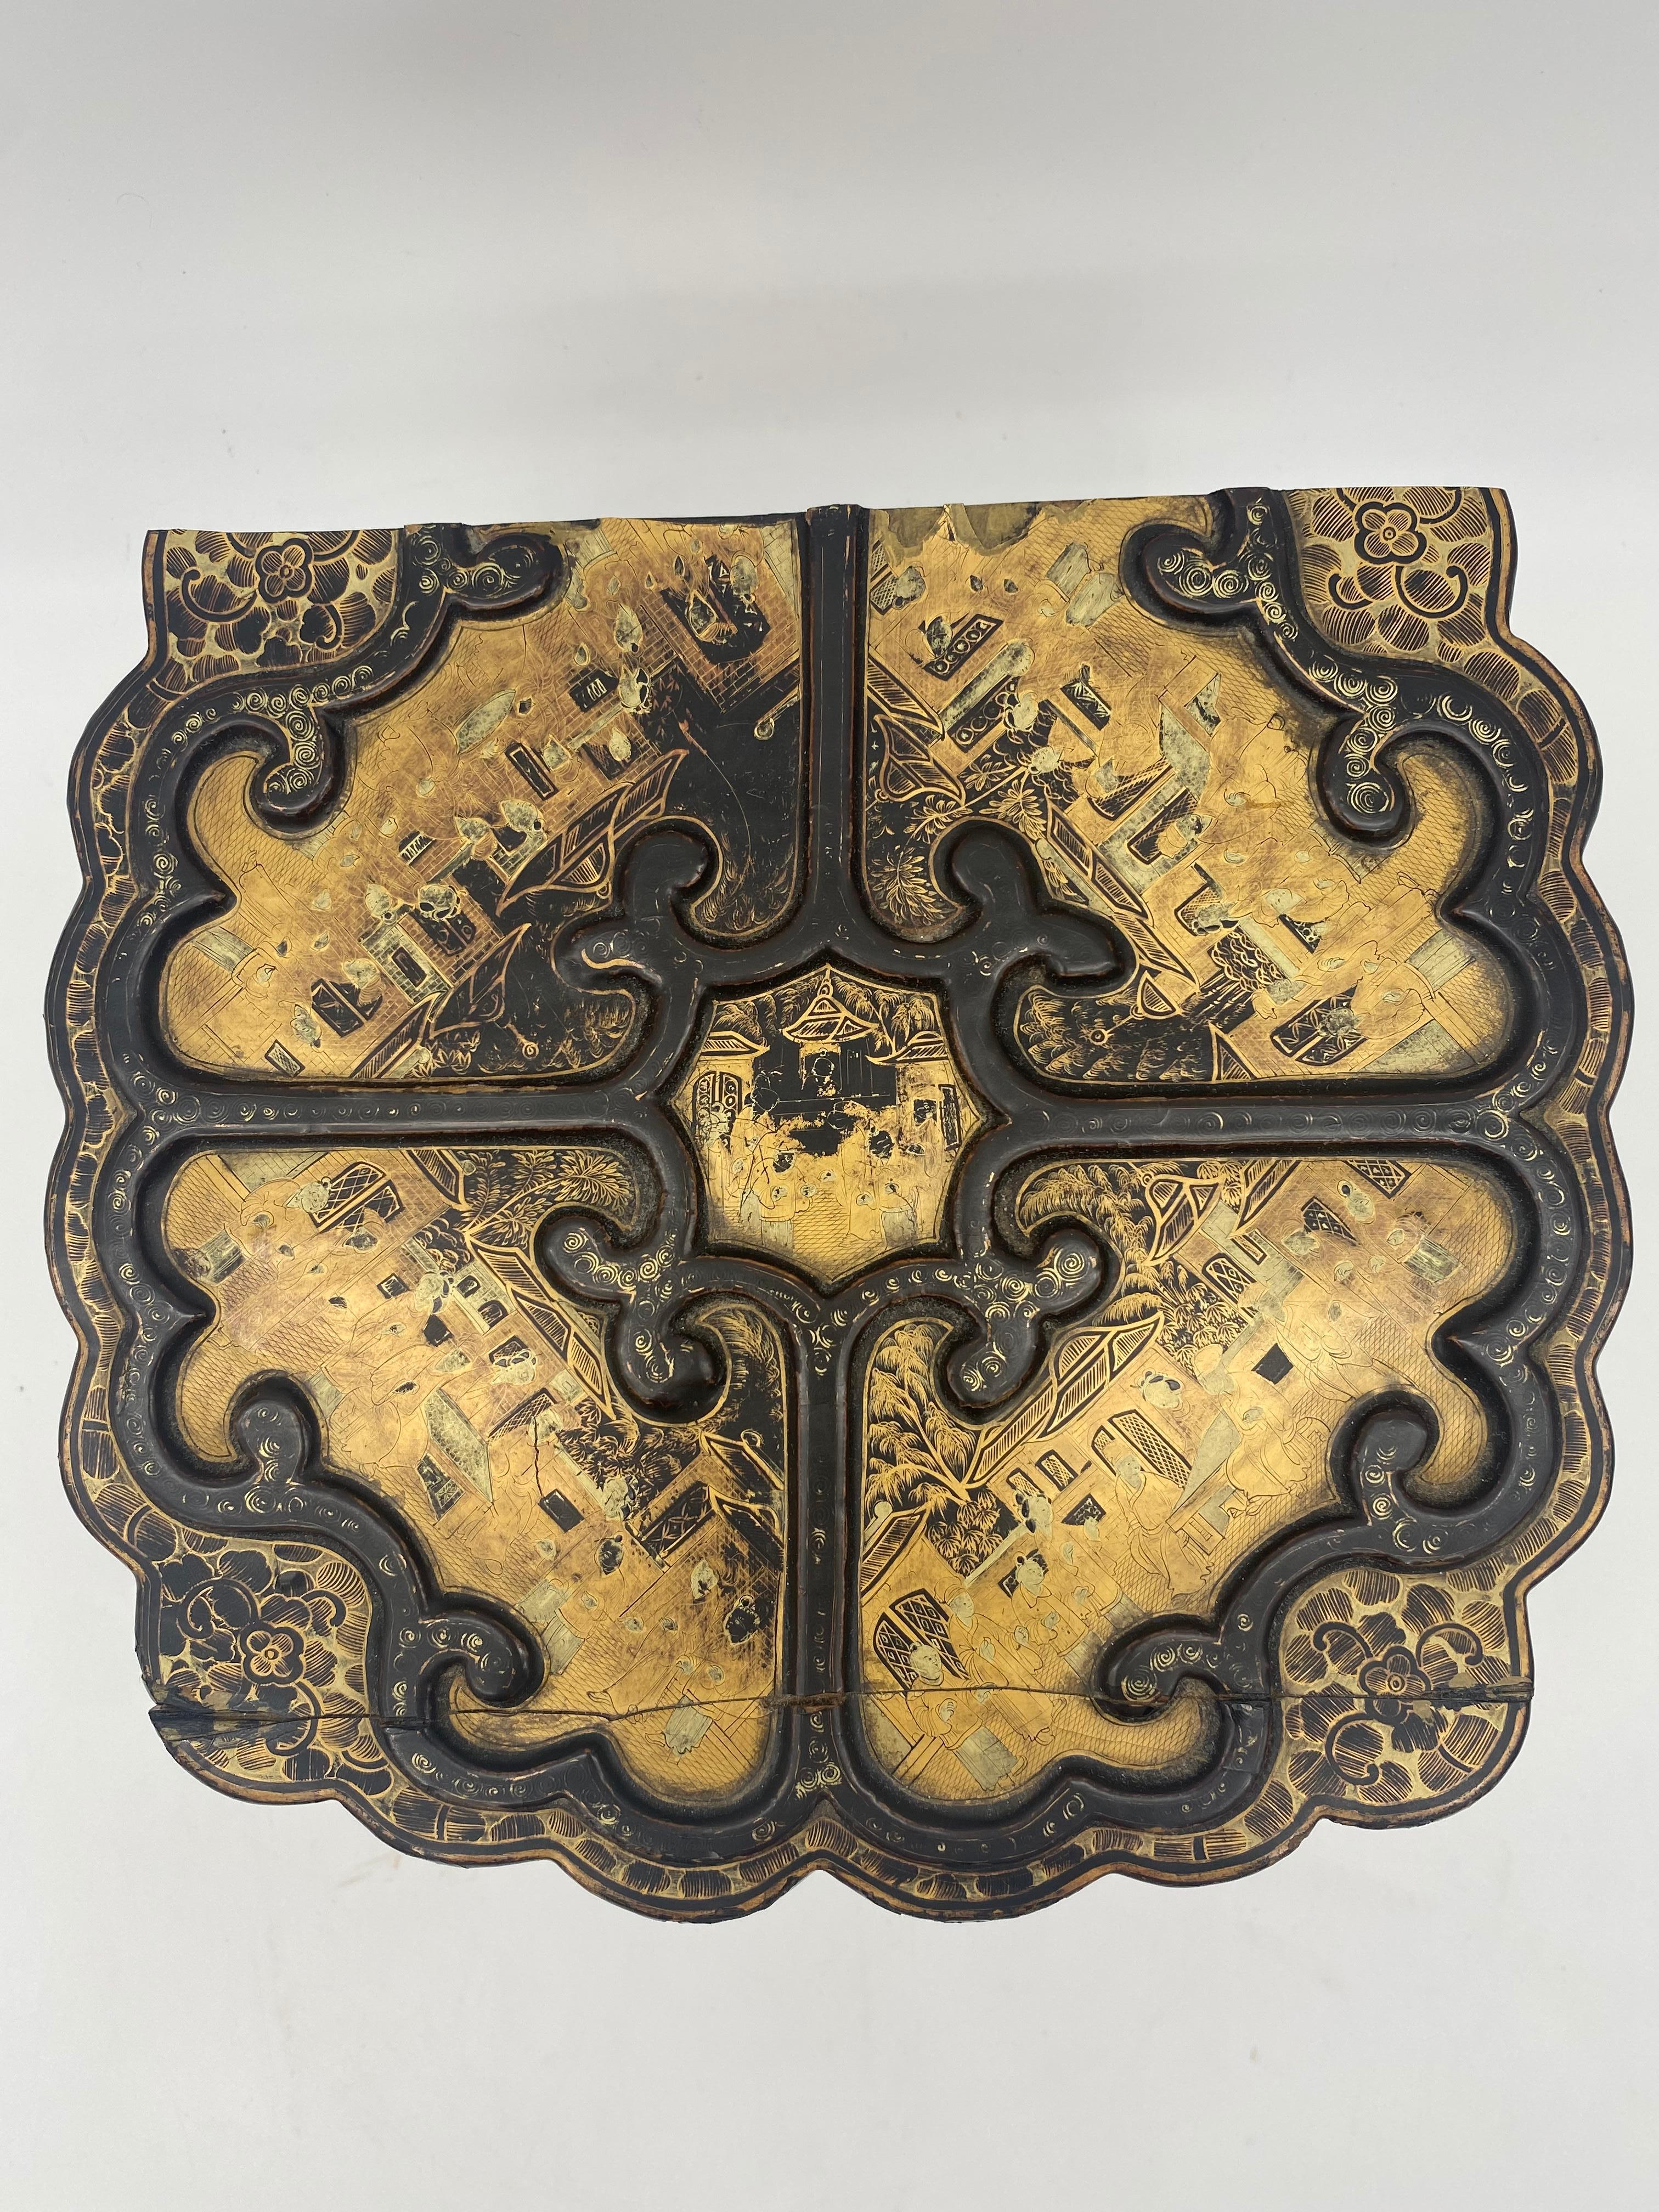 Unique 19th Century  Export Chinese Gilt Chinoiserie Lacquer Box For Sale 9